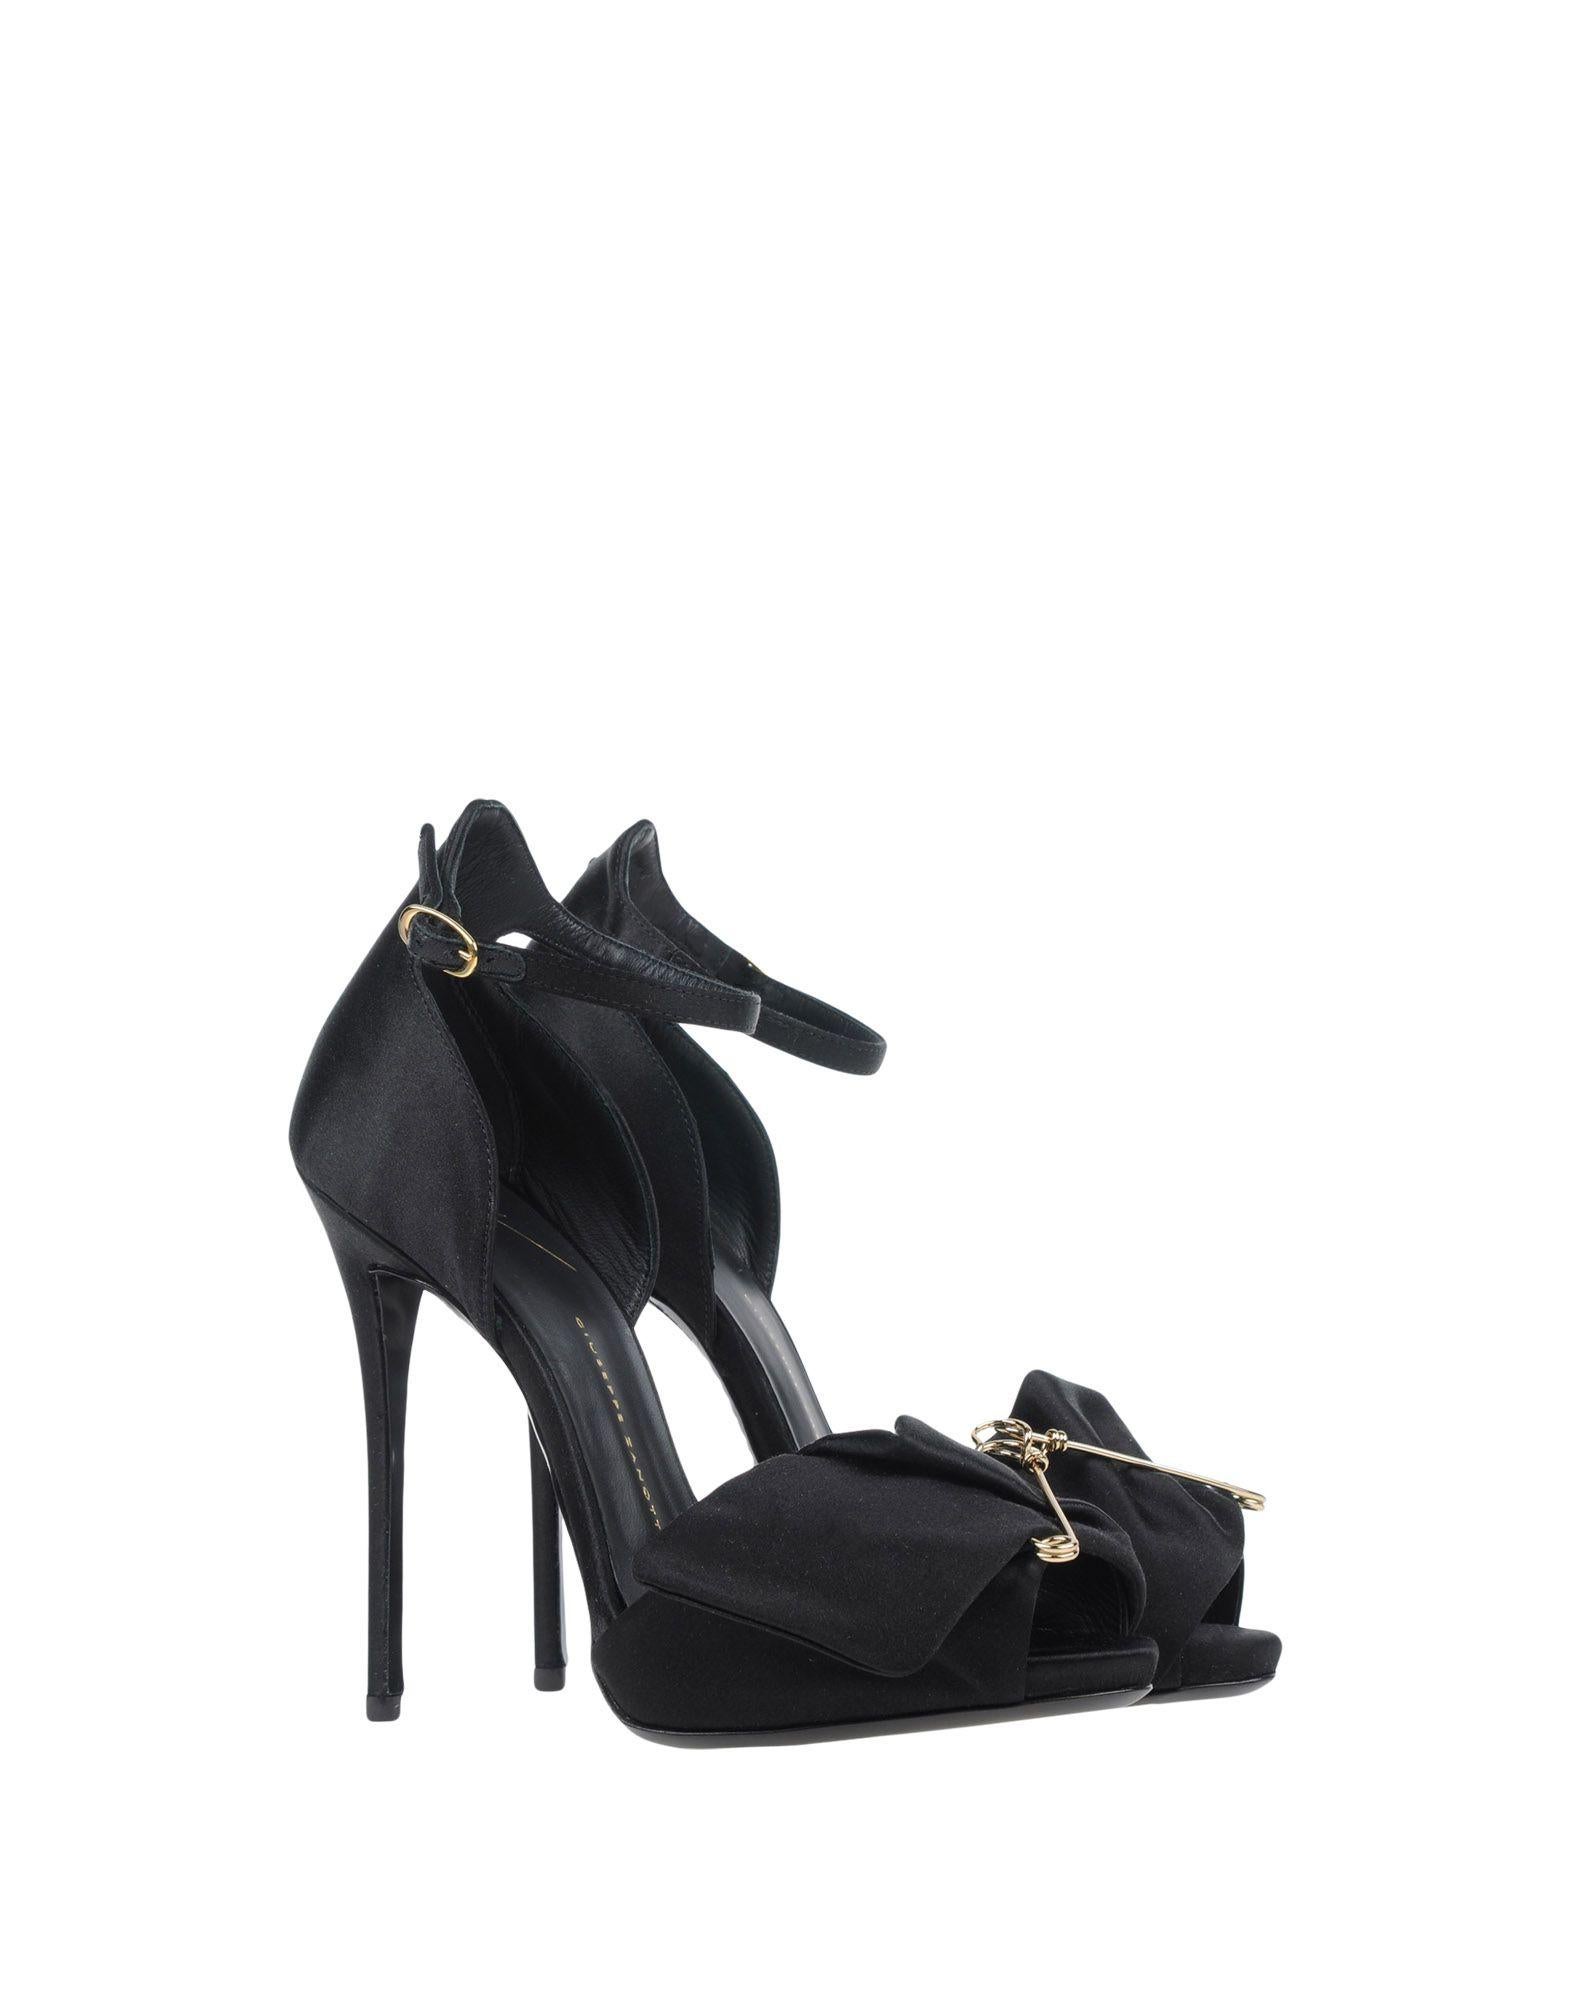 Giuseppe Zanotti NEW Black Satin Gold Safety Pin Evening Sandals Heels in Box

Size IT 36.5
Satin
Metal
Ankle buckle closure
Made in Italy
Heel height 4.75